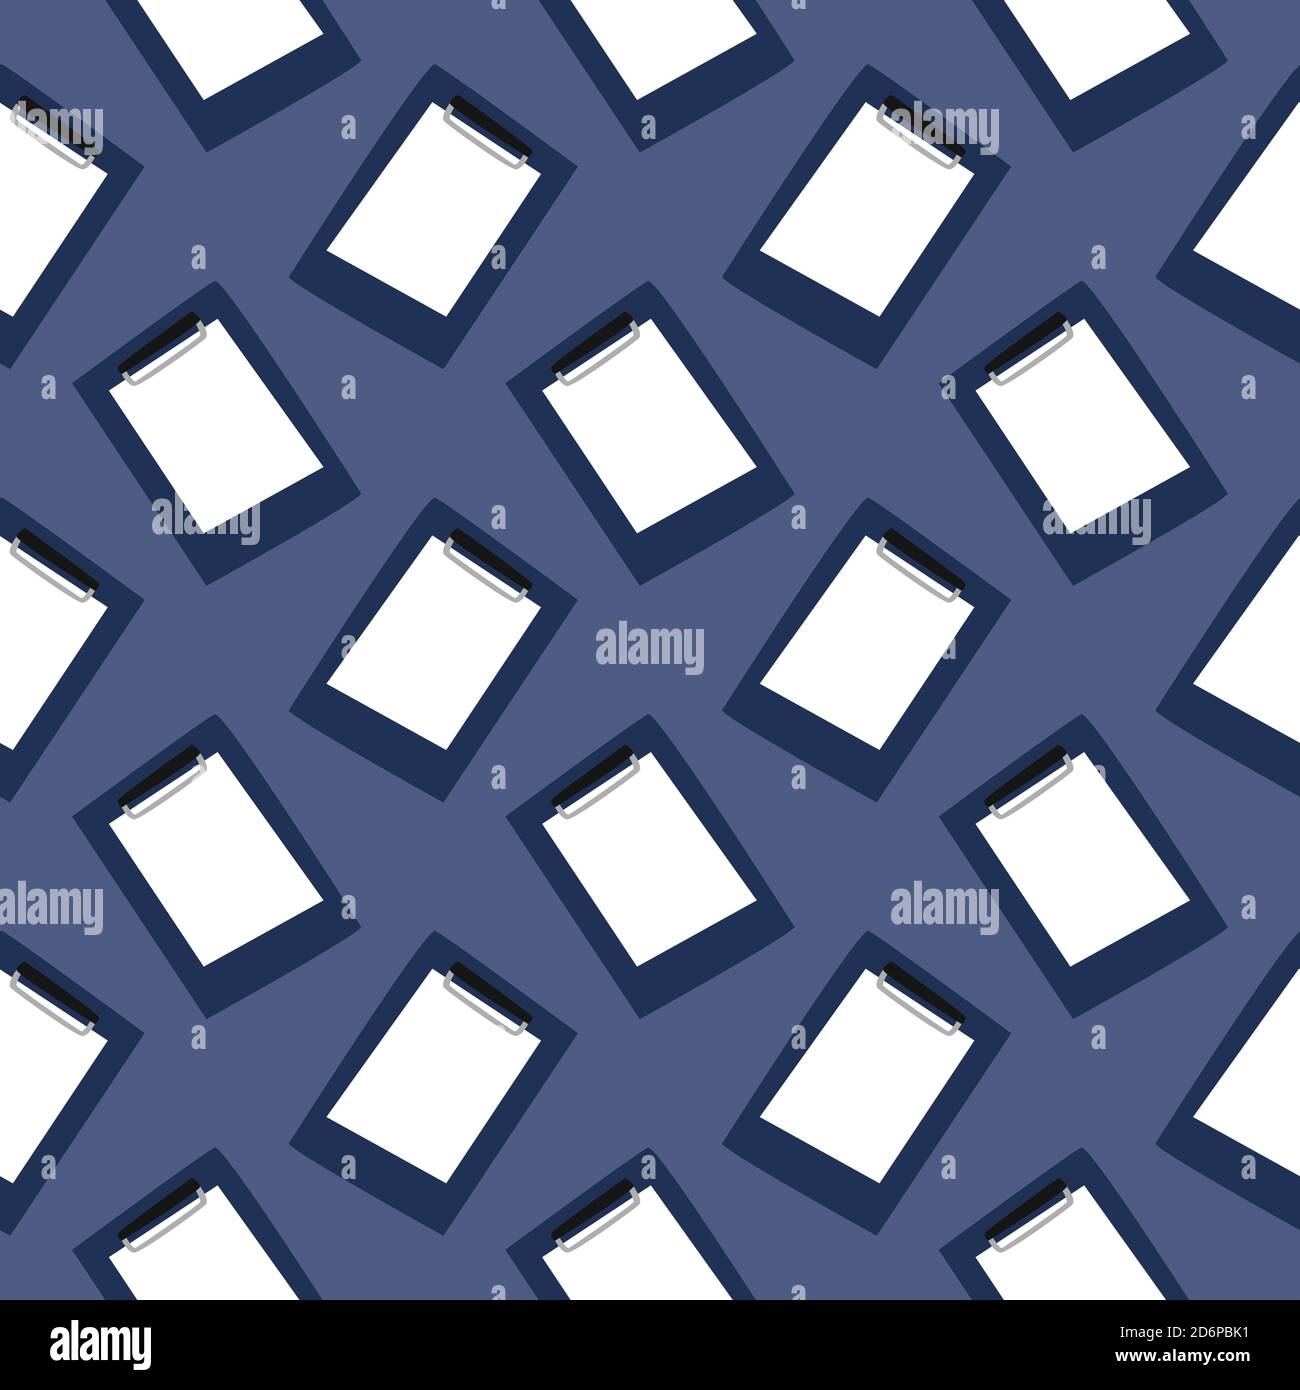 Small documents,seamless pattern on dark blue background. Stock Vector